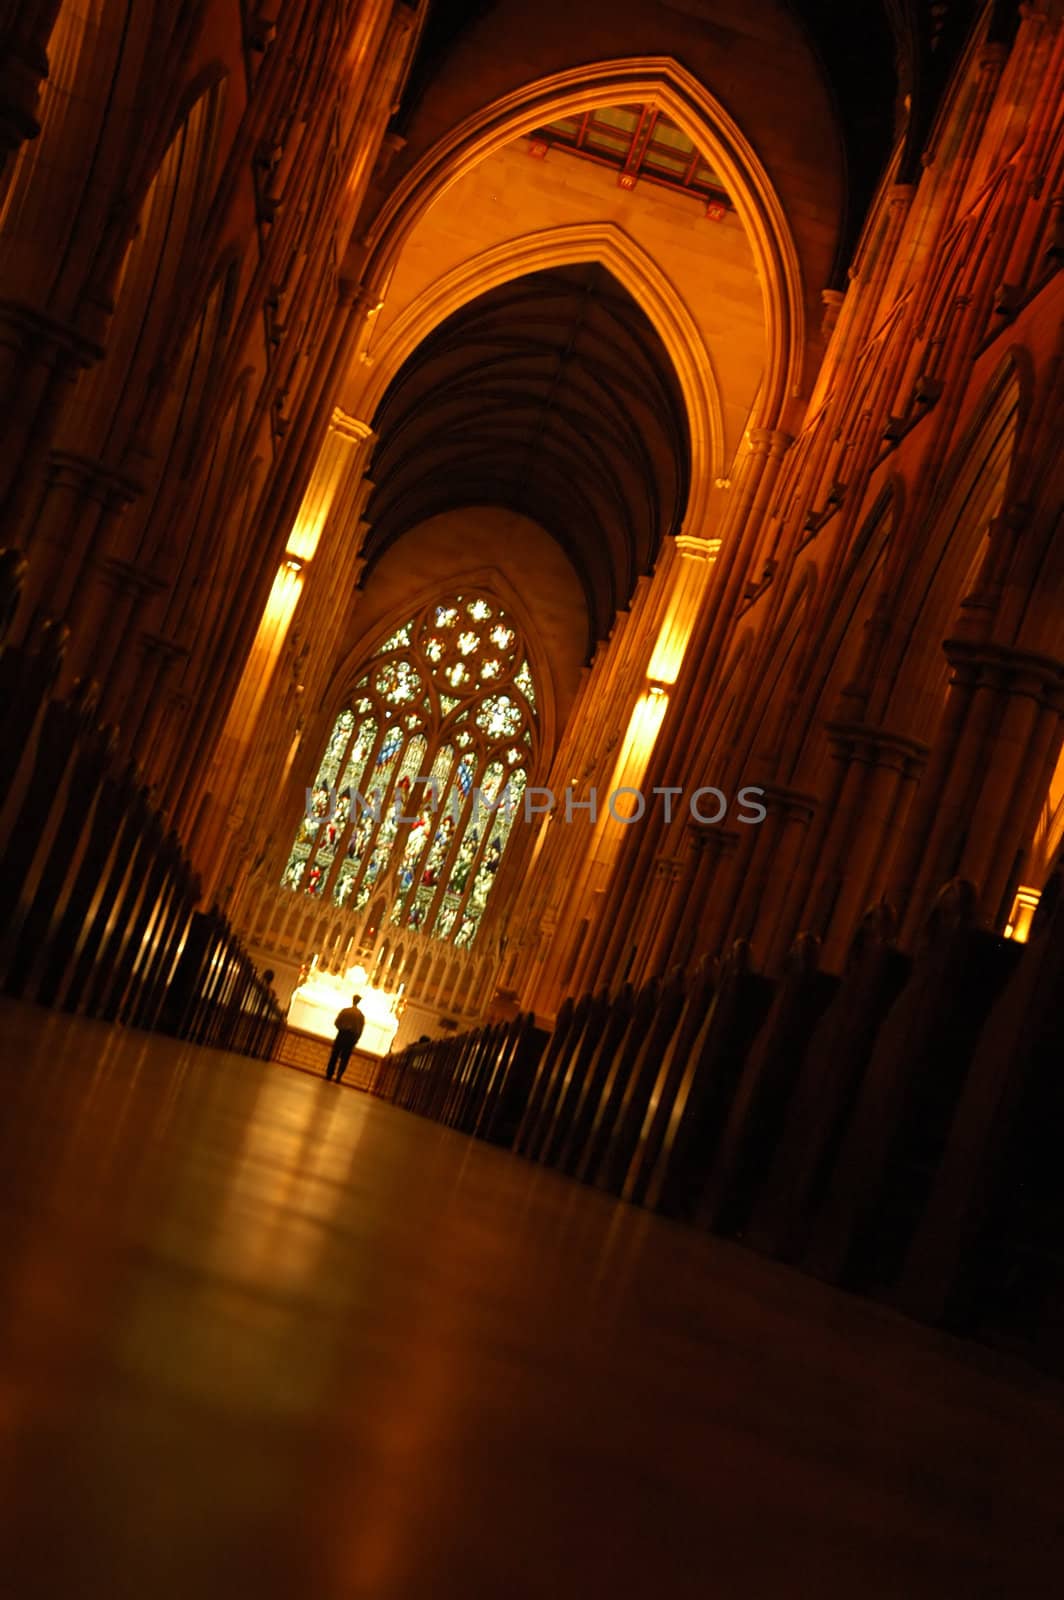 church interior, high ceiling, red lights, solitary man standing in front of altar